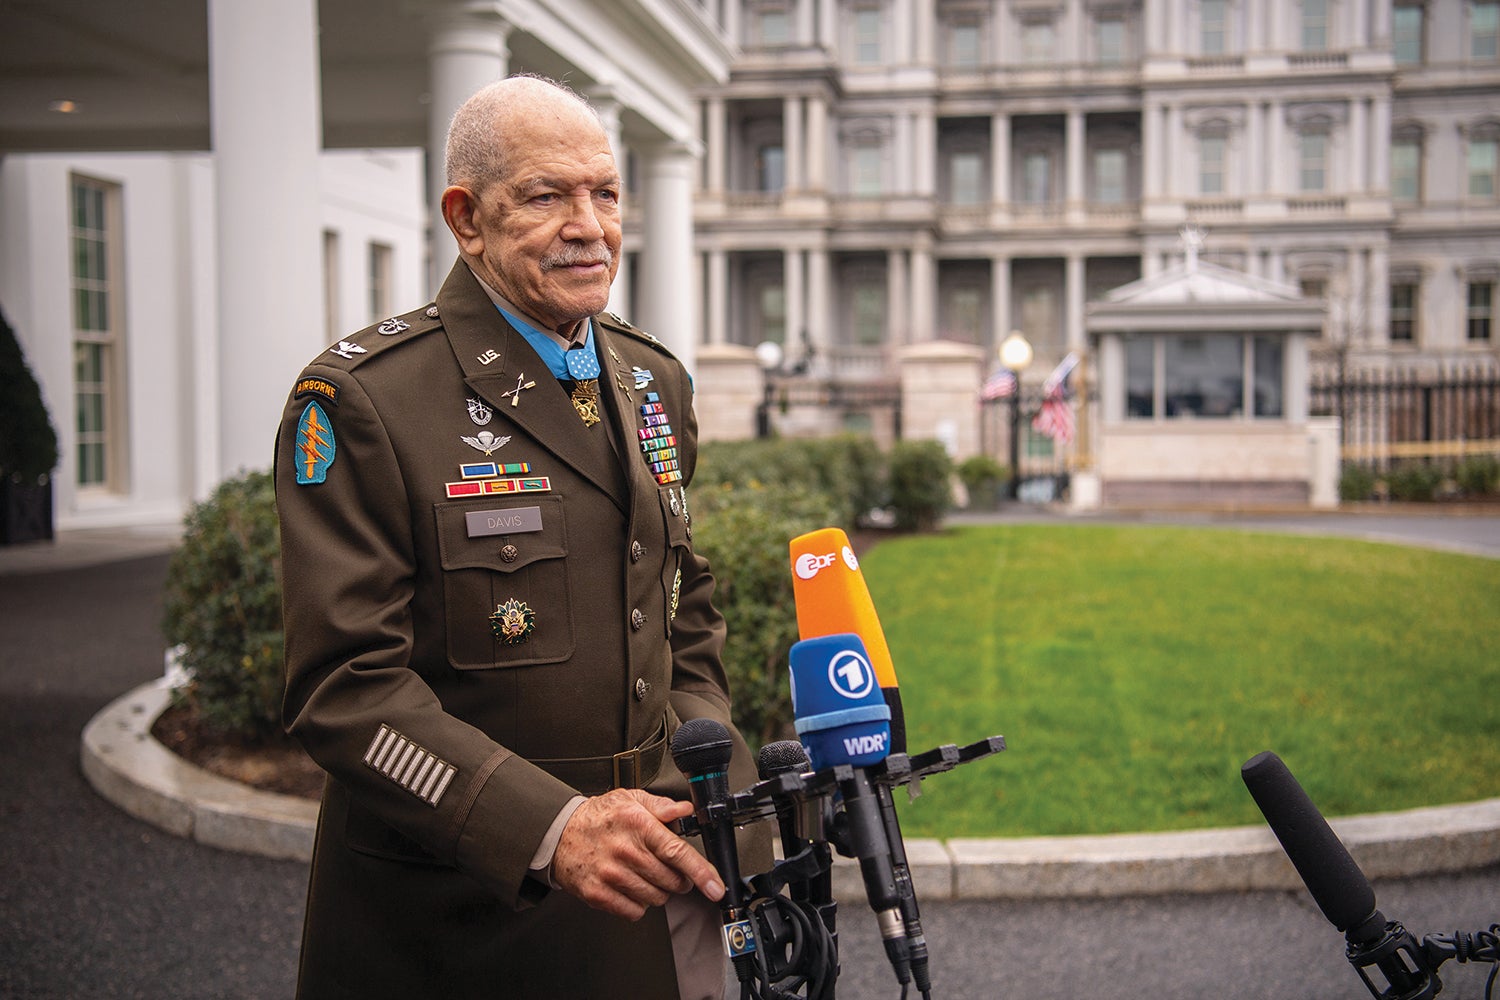 Retired Col. Paris Davis addresses the media after receiving the Medal of Honor at the White House on March 3. (Credit: U.S. Army/Bernardo Fuller)